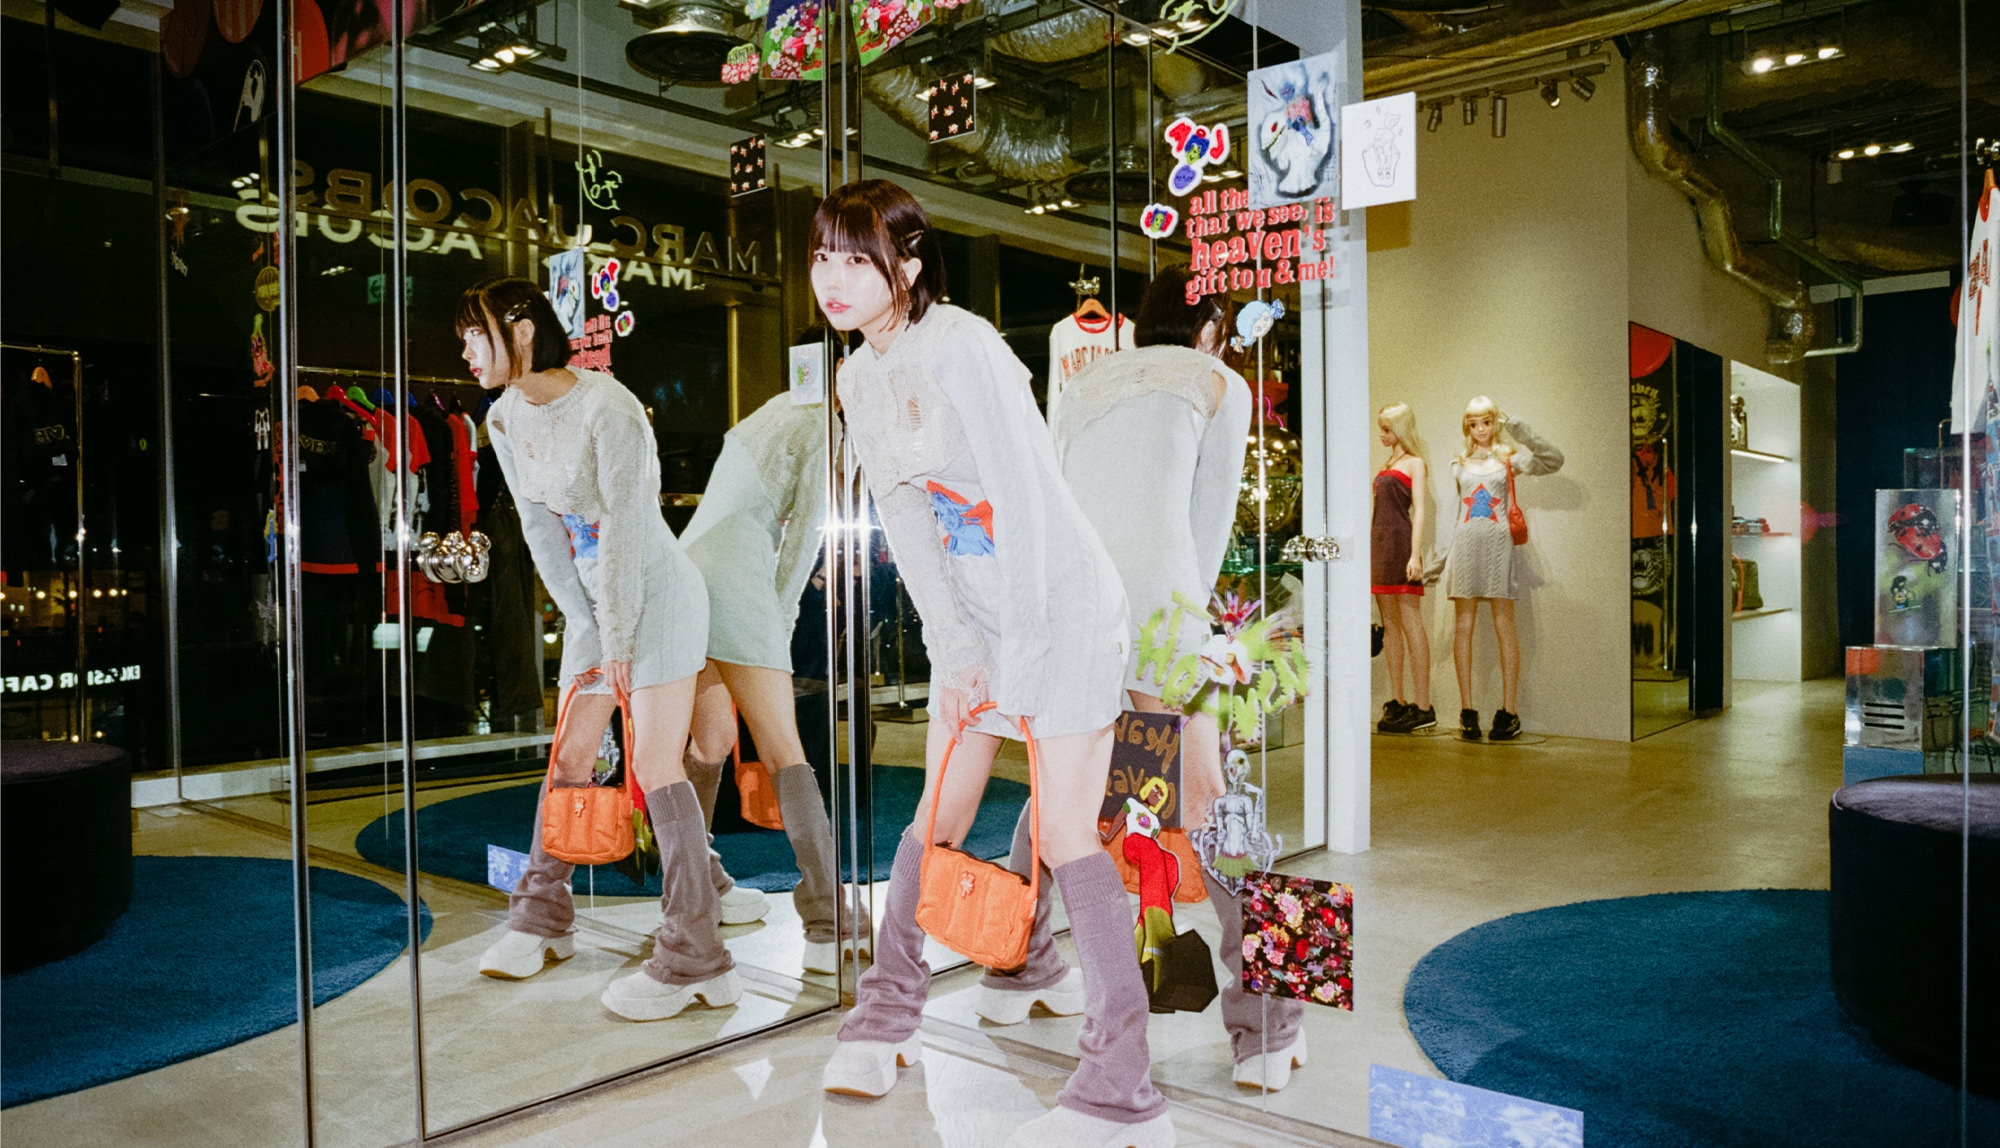 feature | 渋谷PARCO-パルコ-